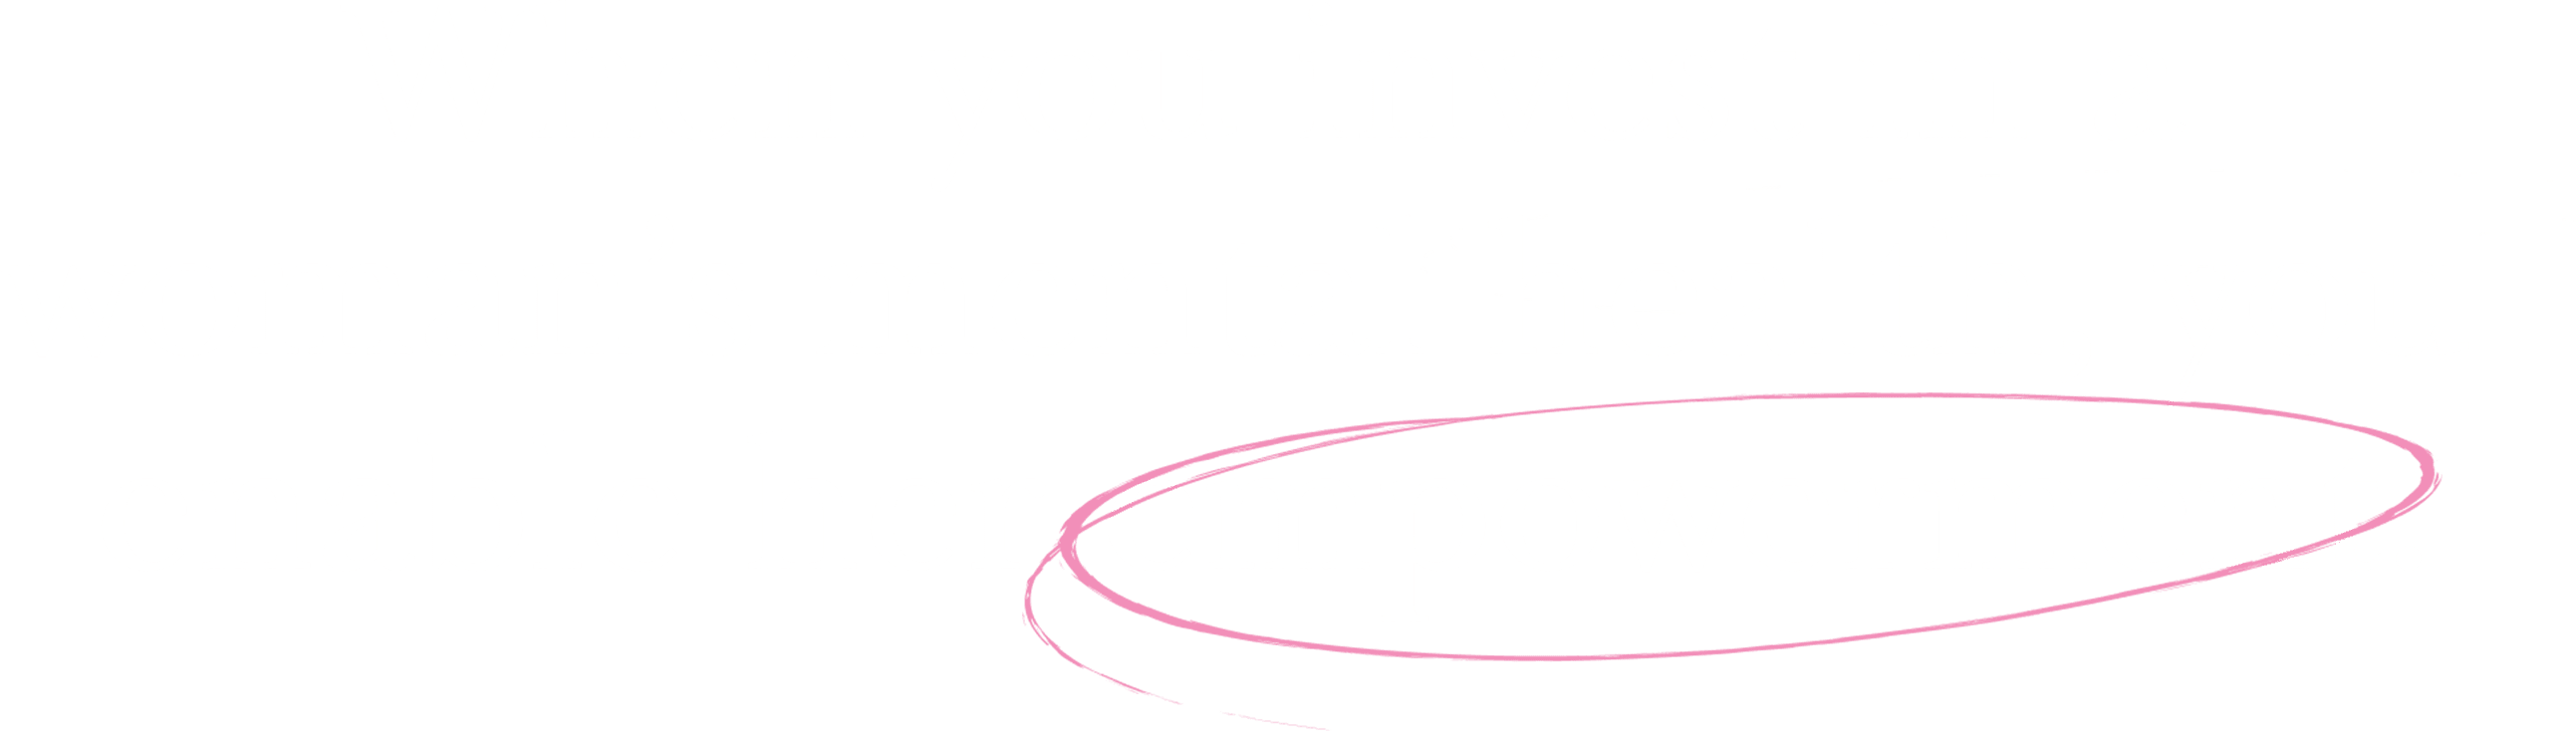 When you invest in a Woman's mental health, you enable her empowerment.